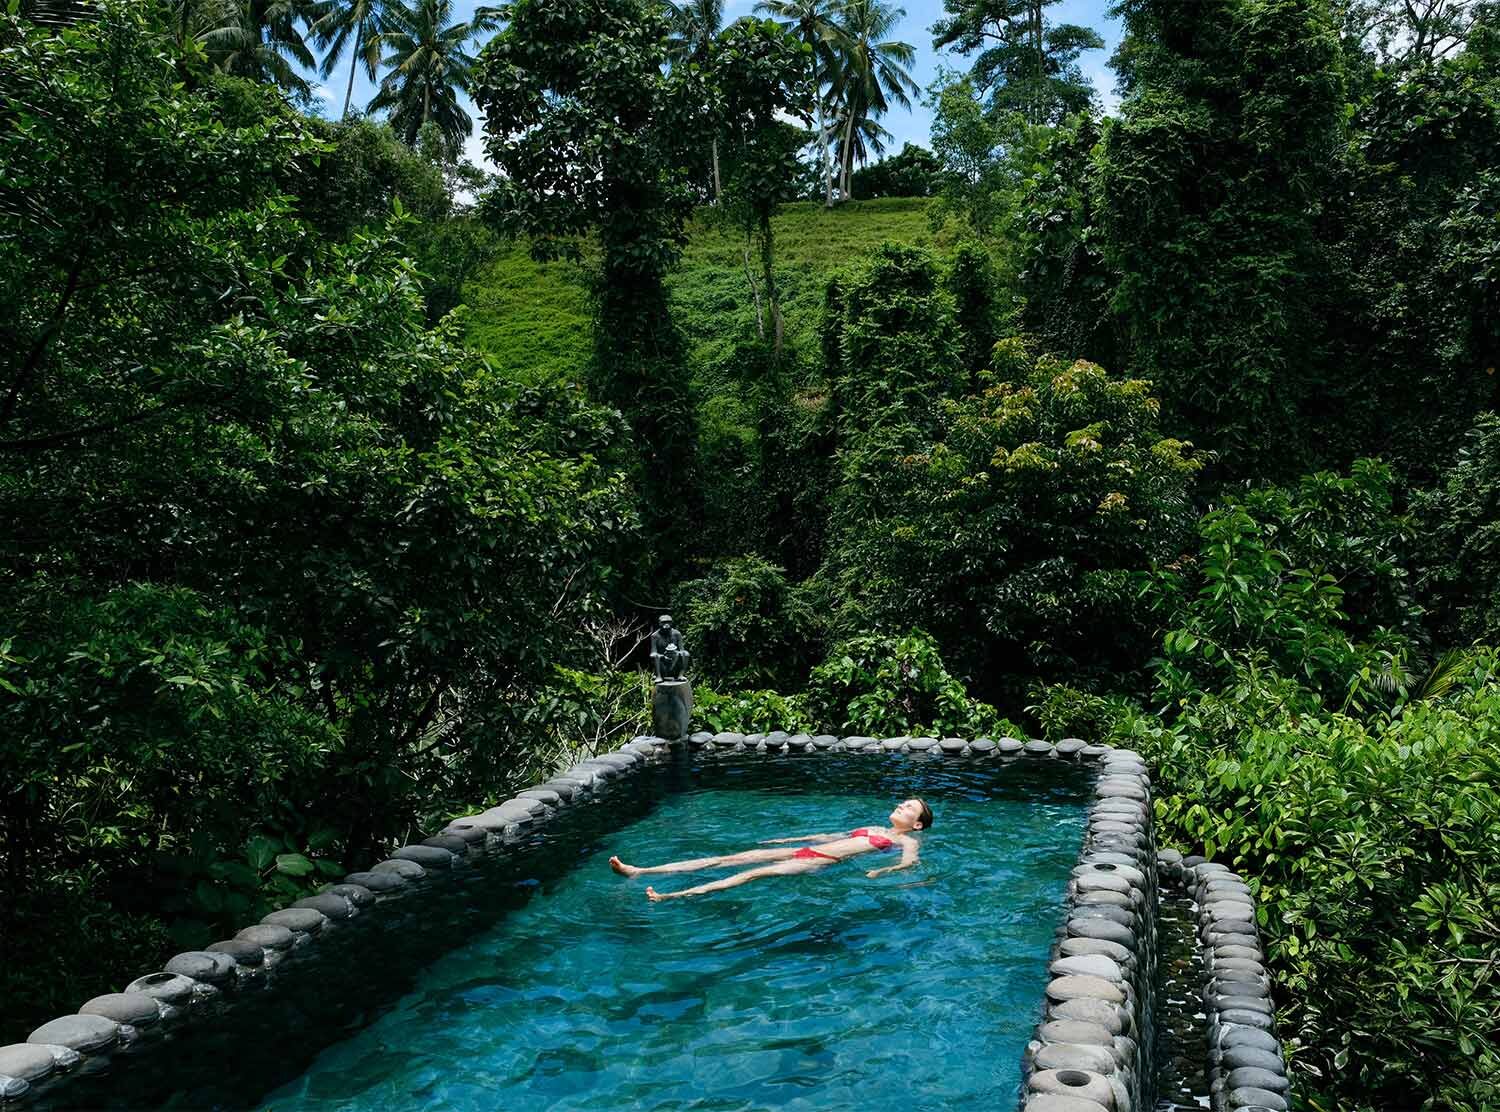 Capella Ubud Spending time floating around. Every tent comes with a private pool suspended in the jungle sounds. It even has a corner with jacuzzi jets